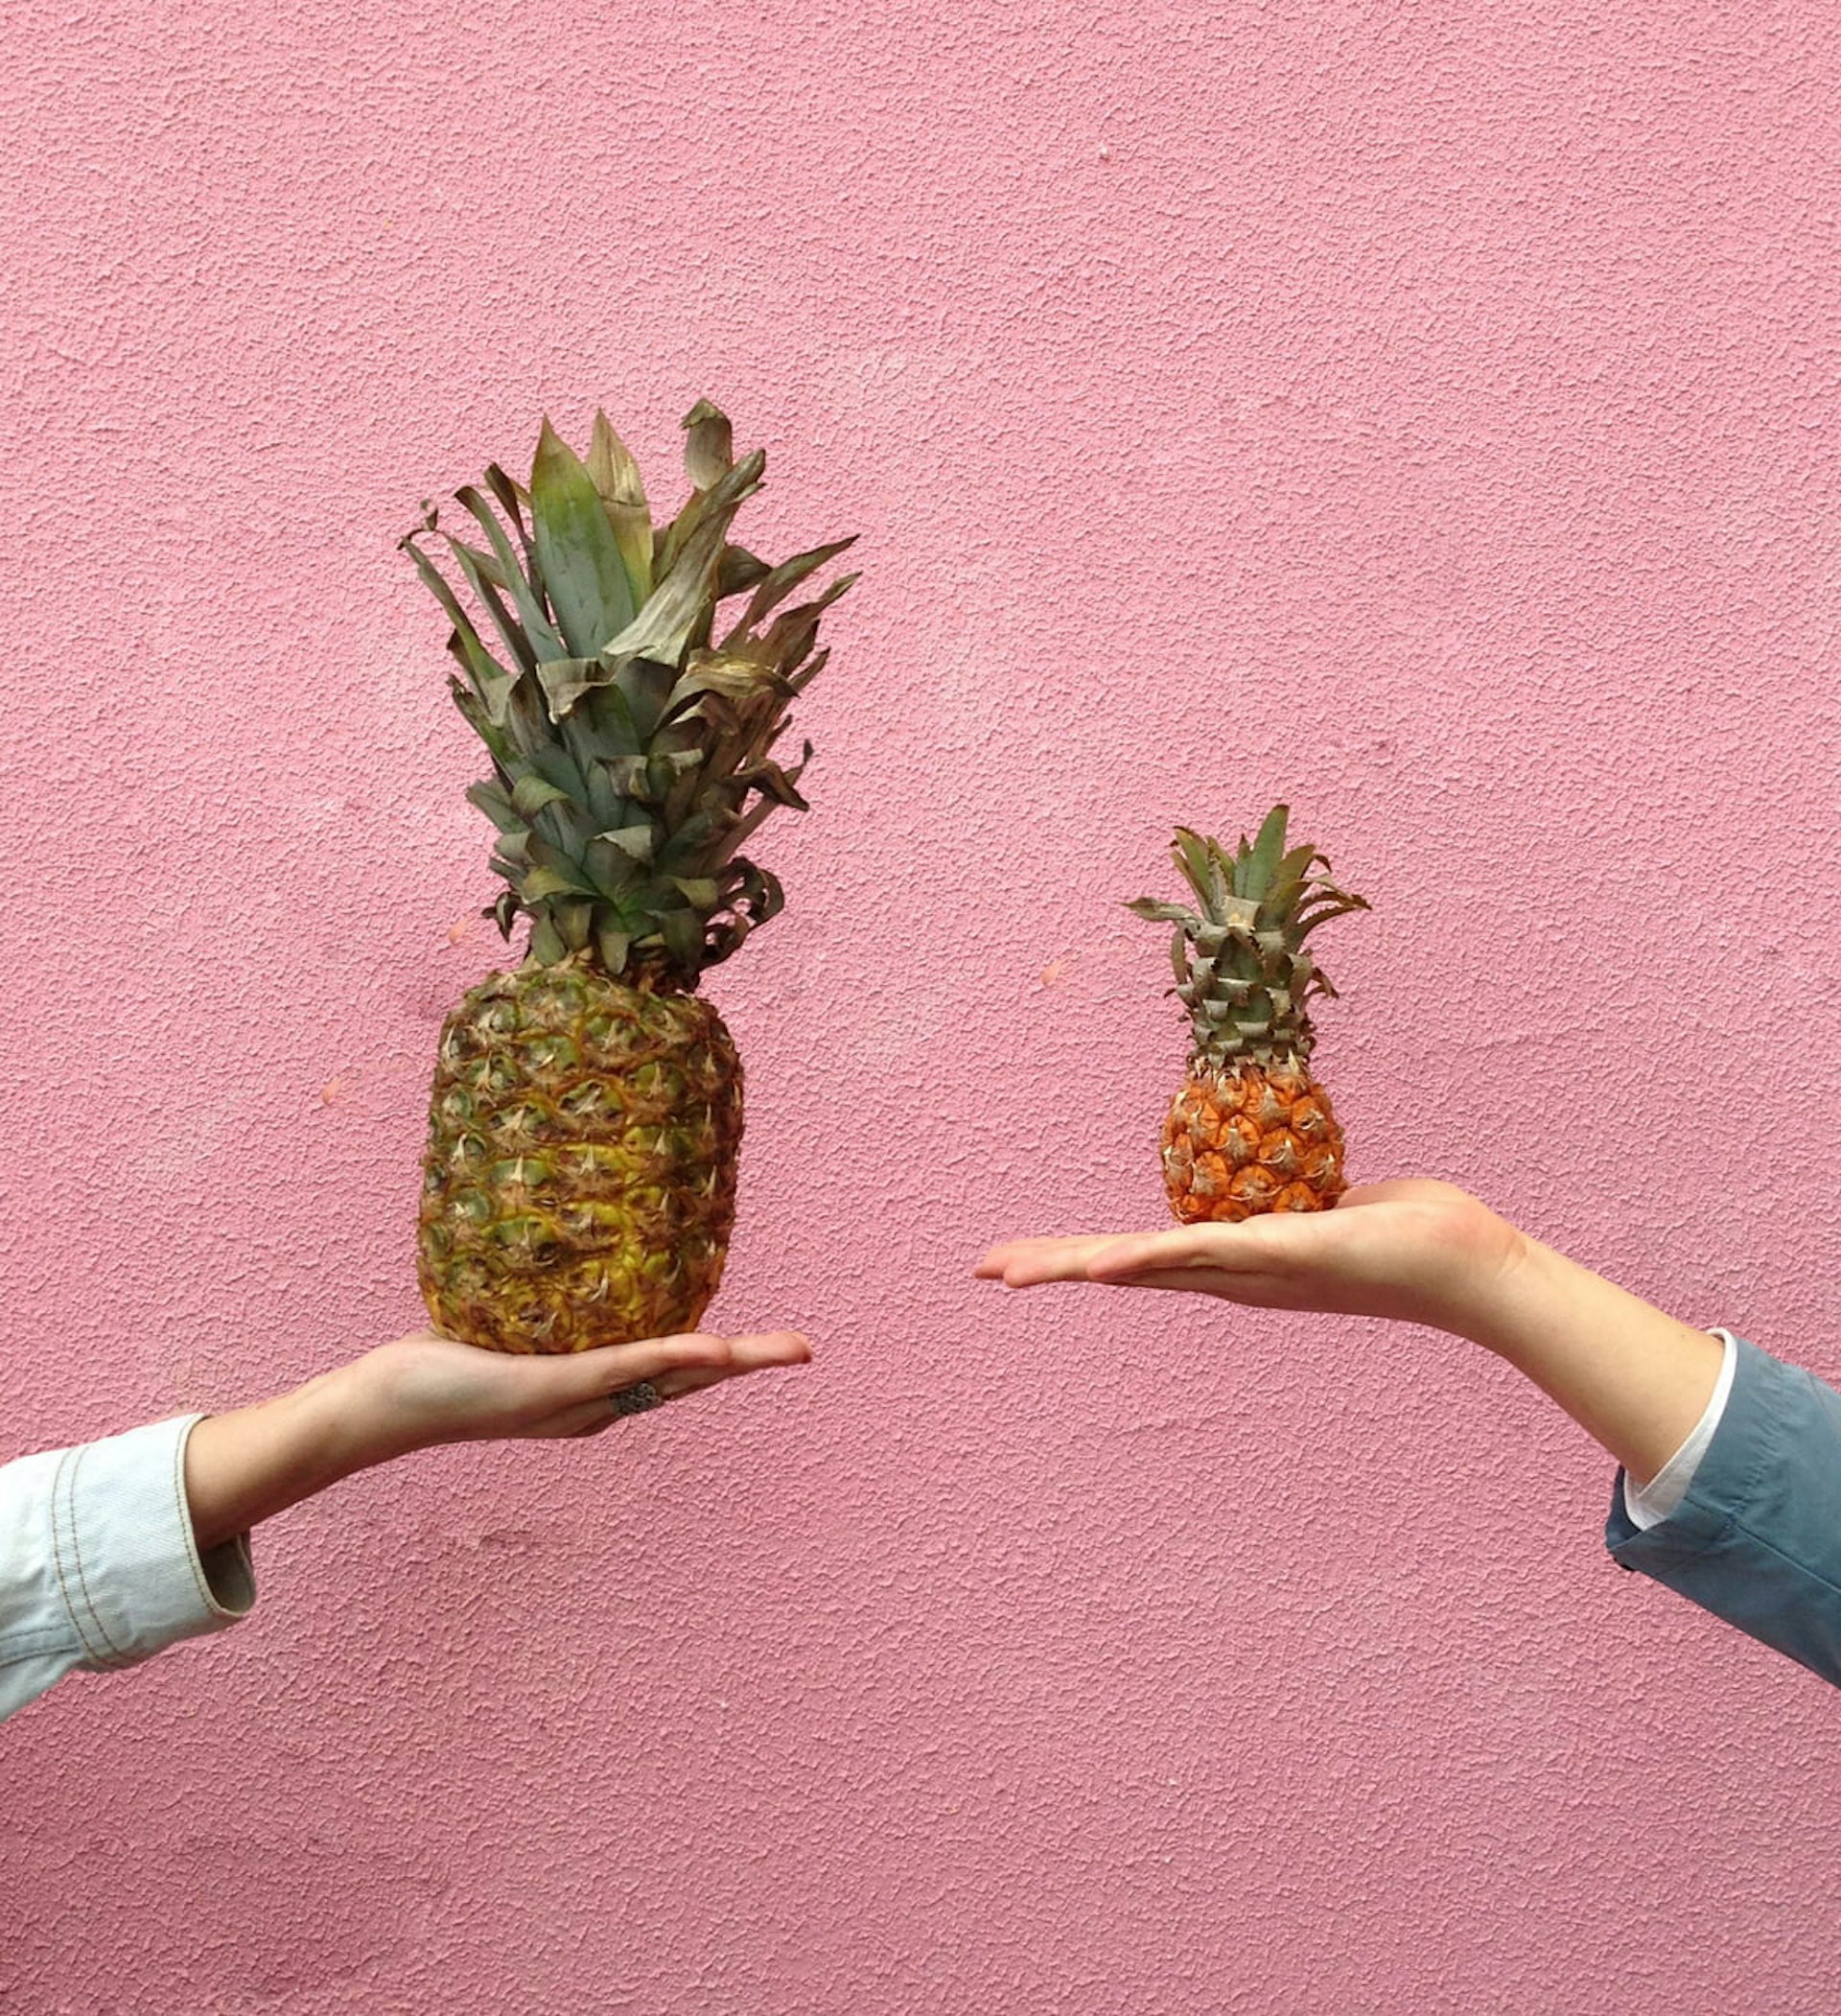 One large pineapple is held up on a hand on the left, one small pineapple is held up on a hand on the right.